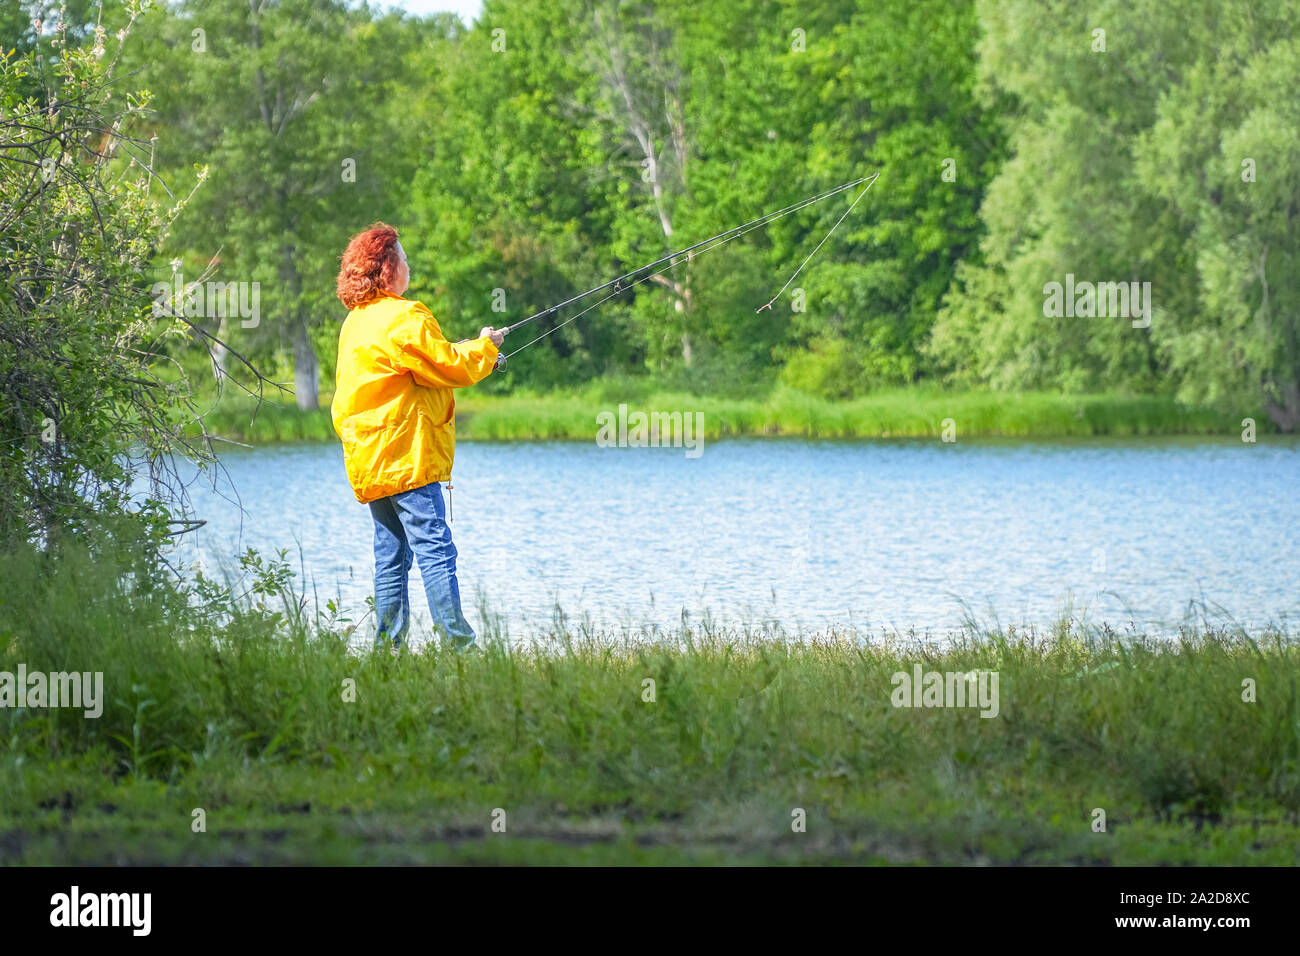 https://c8.alamy.com/comp/2A2D8XC/woman-in-yellow-jacket-fishing-spinning-on-the-lake-2A2D8XC.jpg